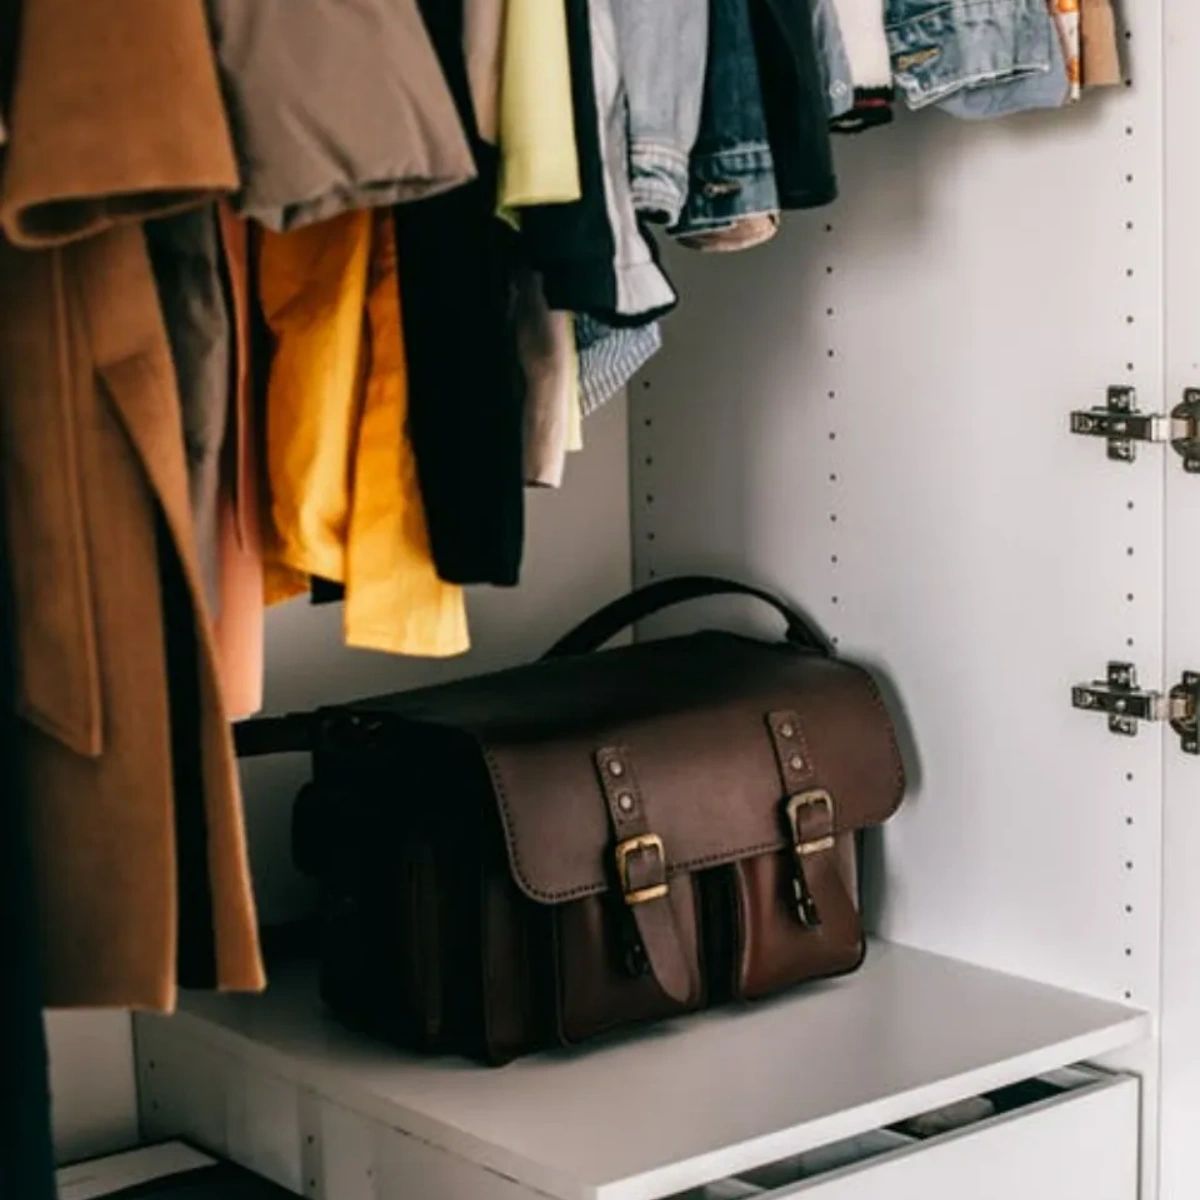 Let's talk about closets! Tossing everything in there is tempting, but buyers want to see that closet space too. Keep them organized, and let your storage shine. #ClosetGoals #HappyBuyers #SellingTips